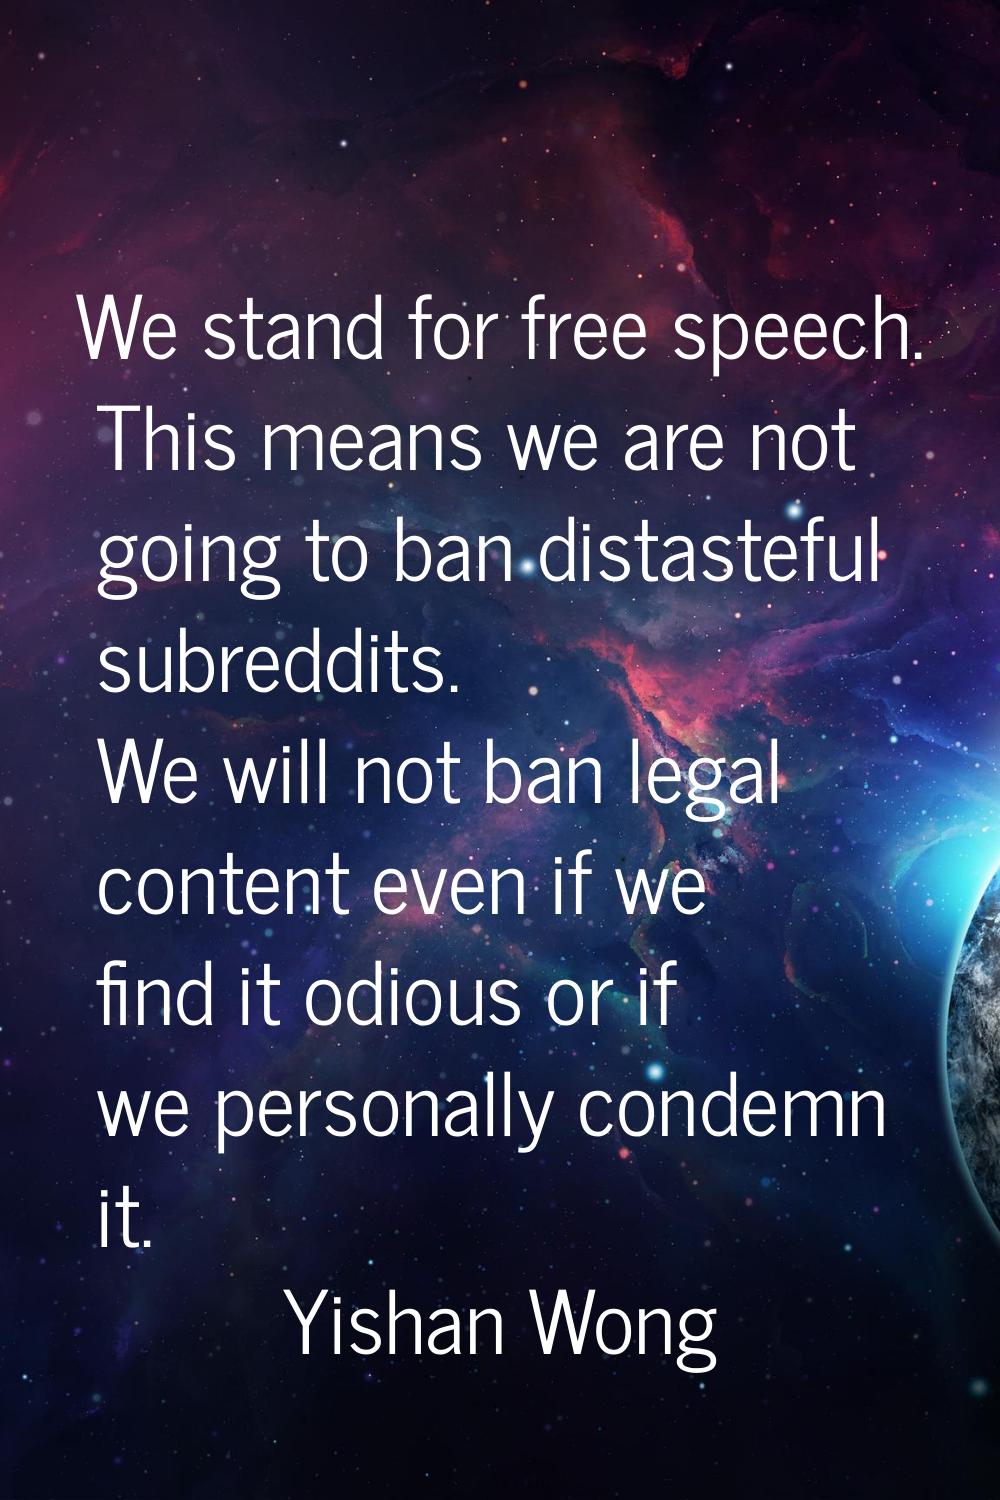 We stand for free speech. This means we are not going to ban distasteful subreddits. We will not ba